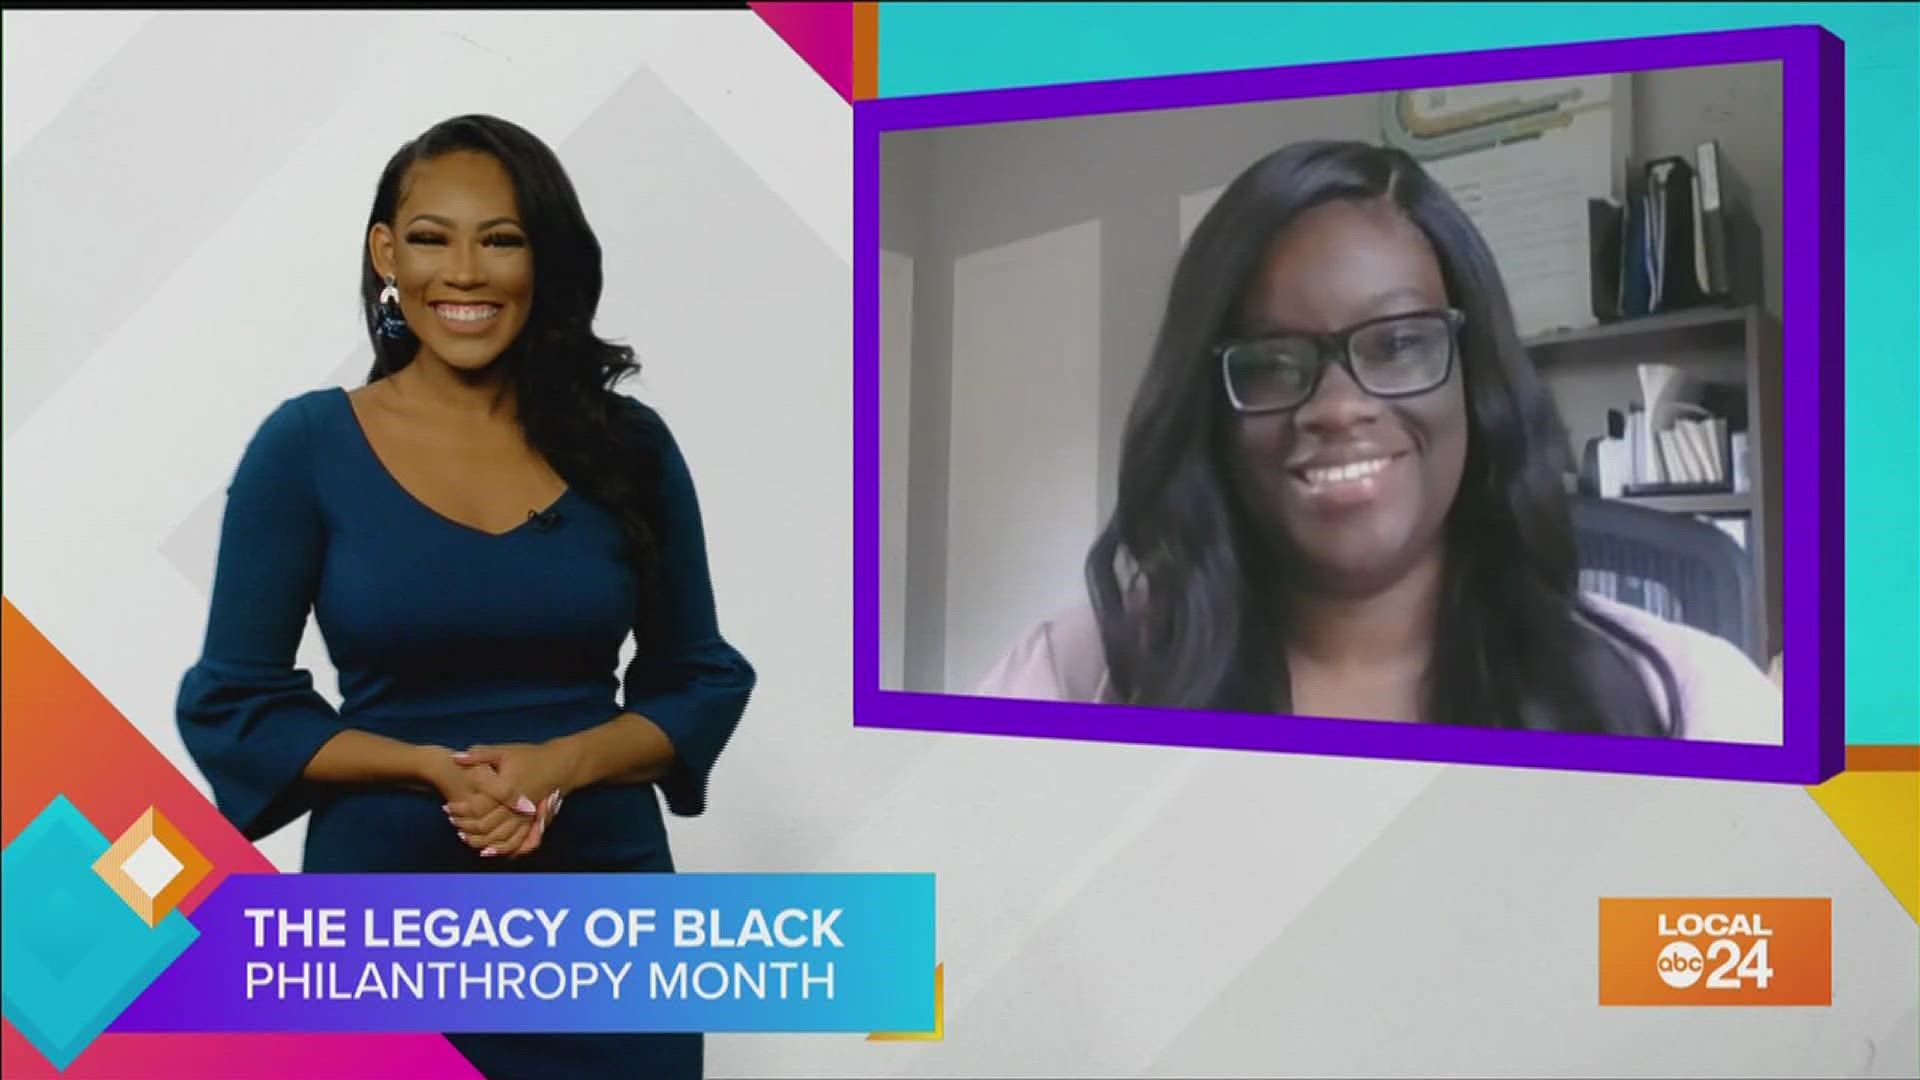 Did you know that August is Black Philanthropy Month? Learn more about this underrated celebration and more with Community Foundation director Aerial Ozuzu!